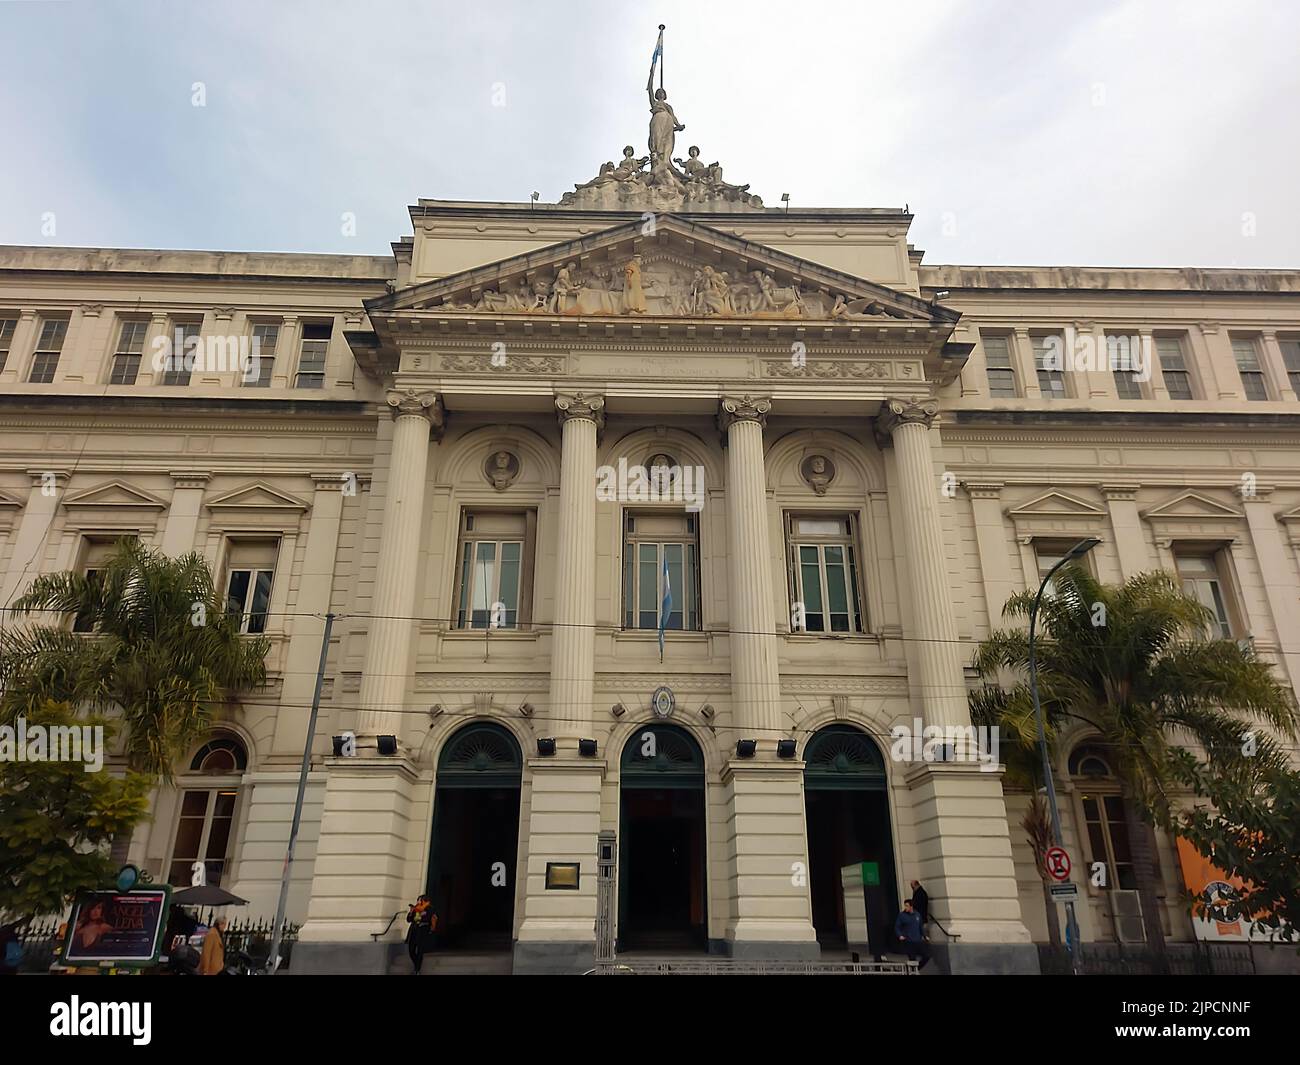 Facade of the Faculty of Economics, Buenos Aires University UBA, Argentina. Public building  in eclectic architecture style dating from 1908 . Stock Photo